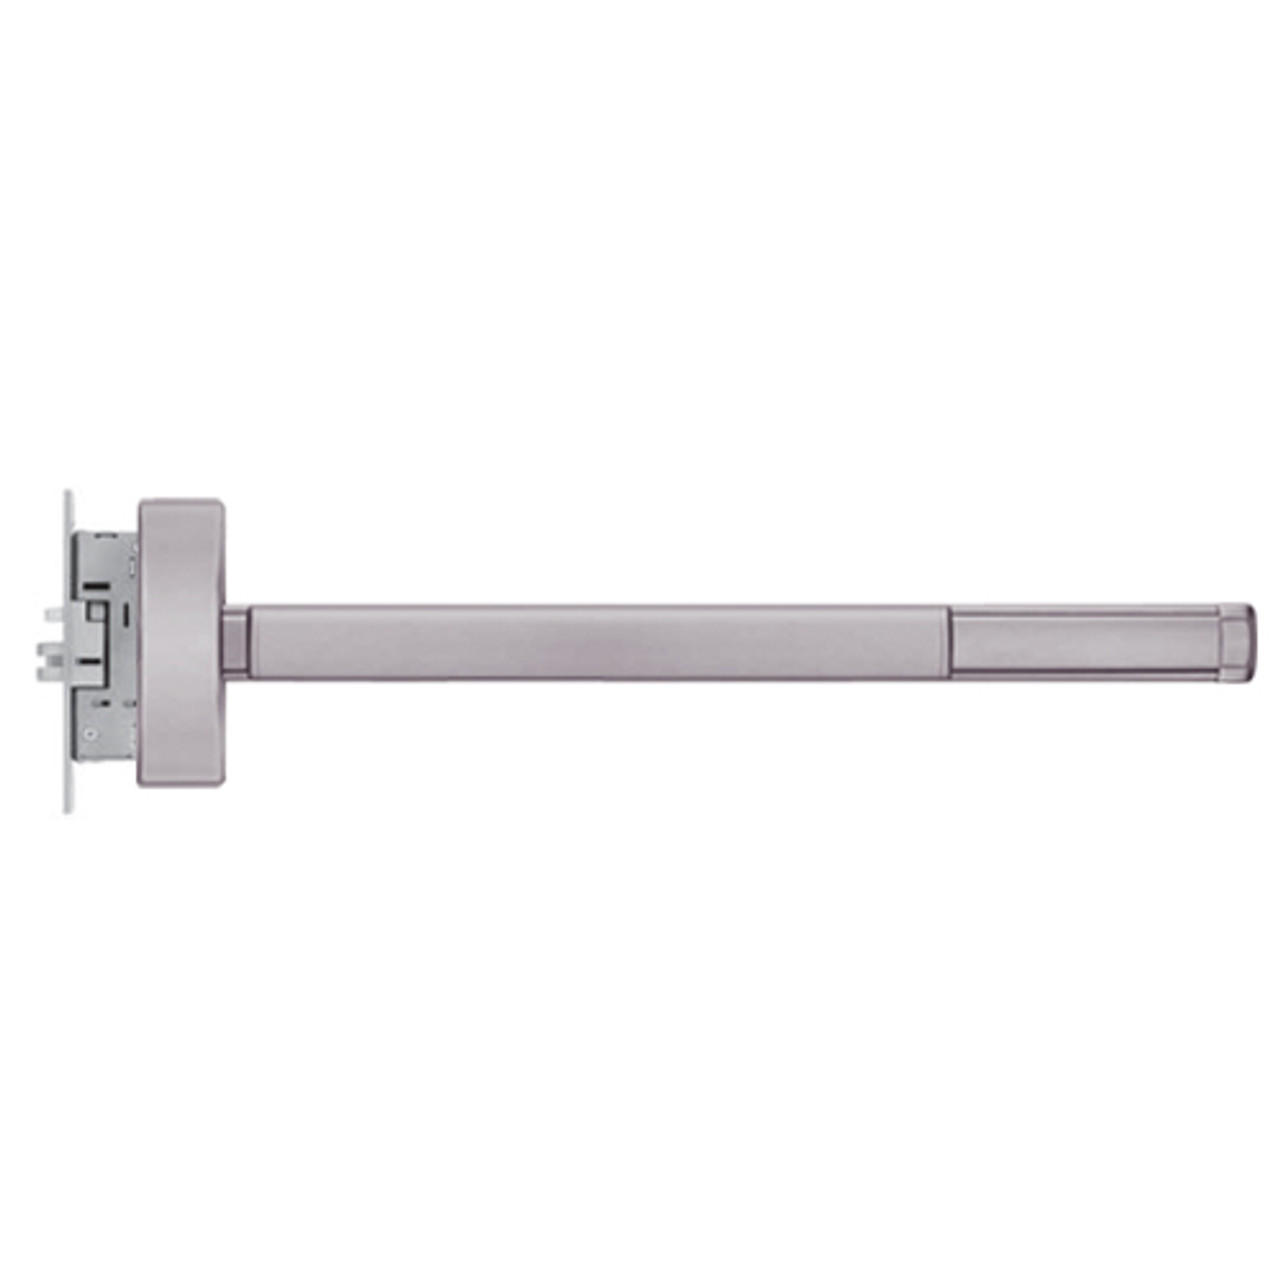 TSFL2314-LHR-630-48 PHI 2300 Series Fire Rated Apex Mortise Exit Device with Touchbar Monitoring Switch Prepped for Lever-Knob Always Active in Satin Stainless Steel Finish